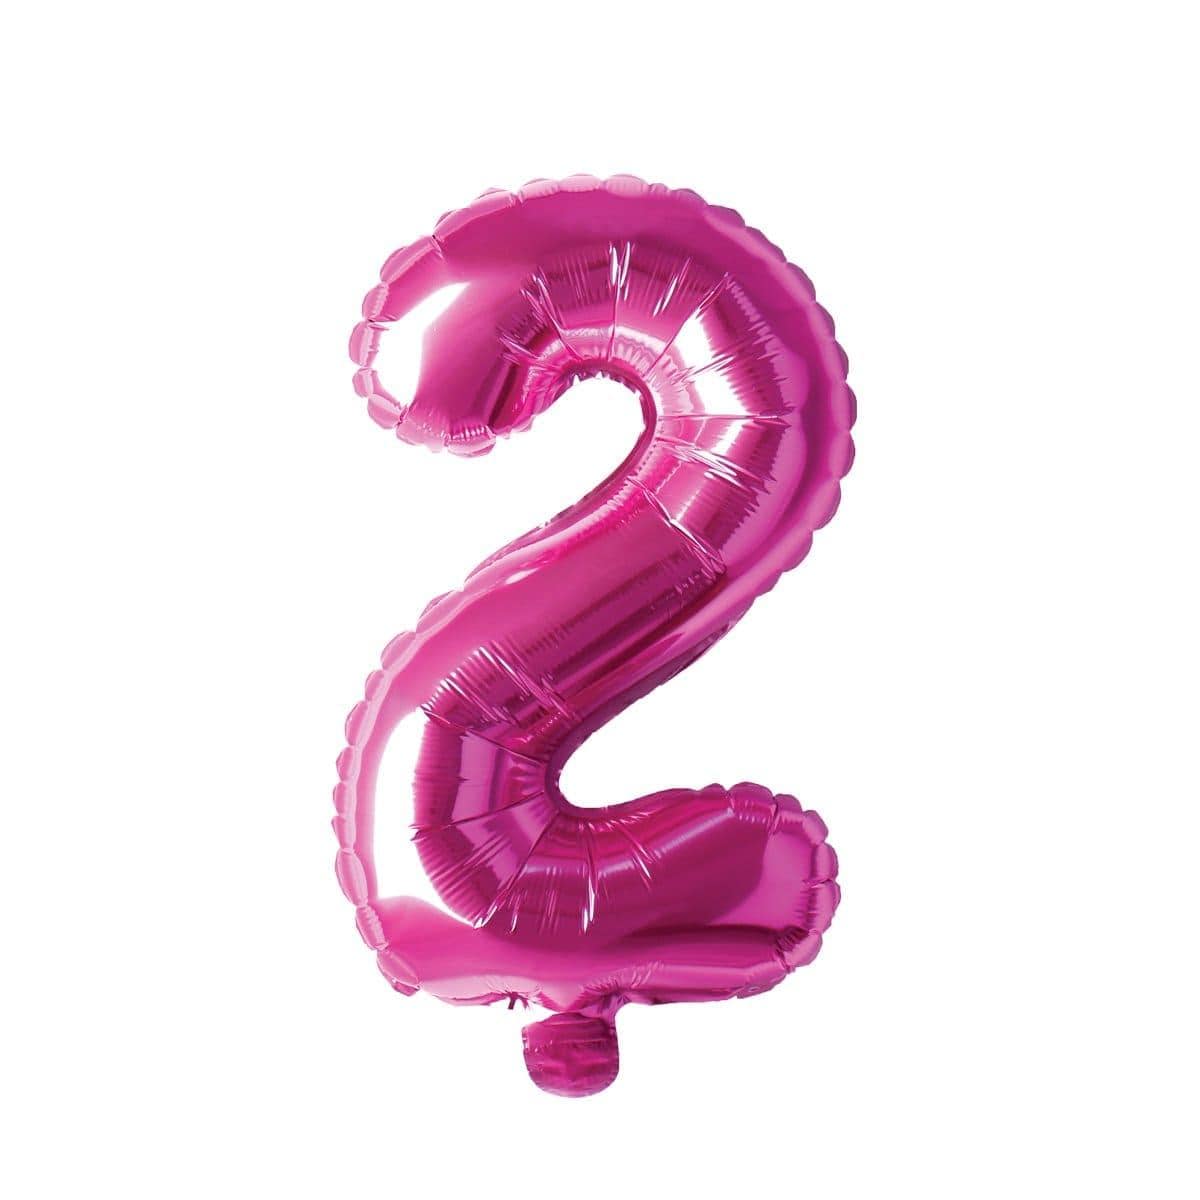 Buy Balloons Pink Number 2 Foil Balloon, 16 Inches sold at Party Expert